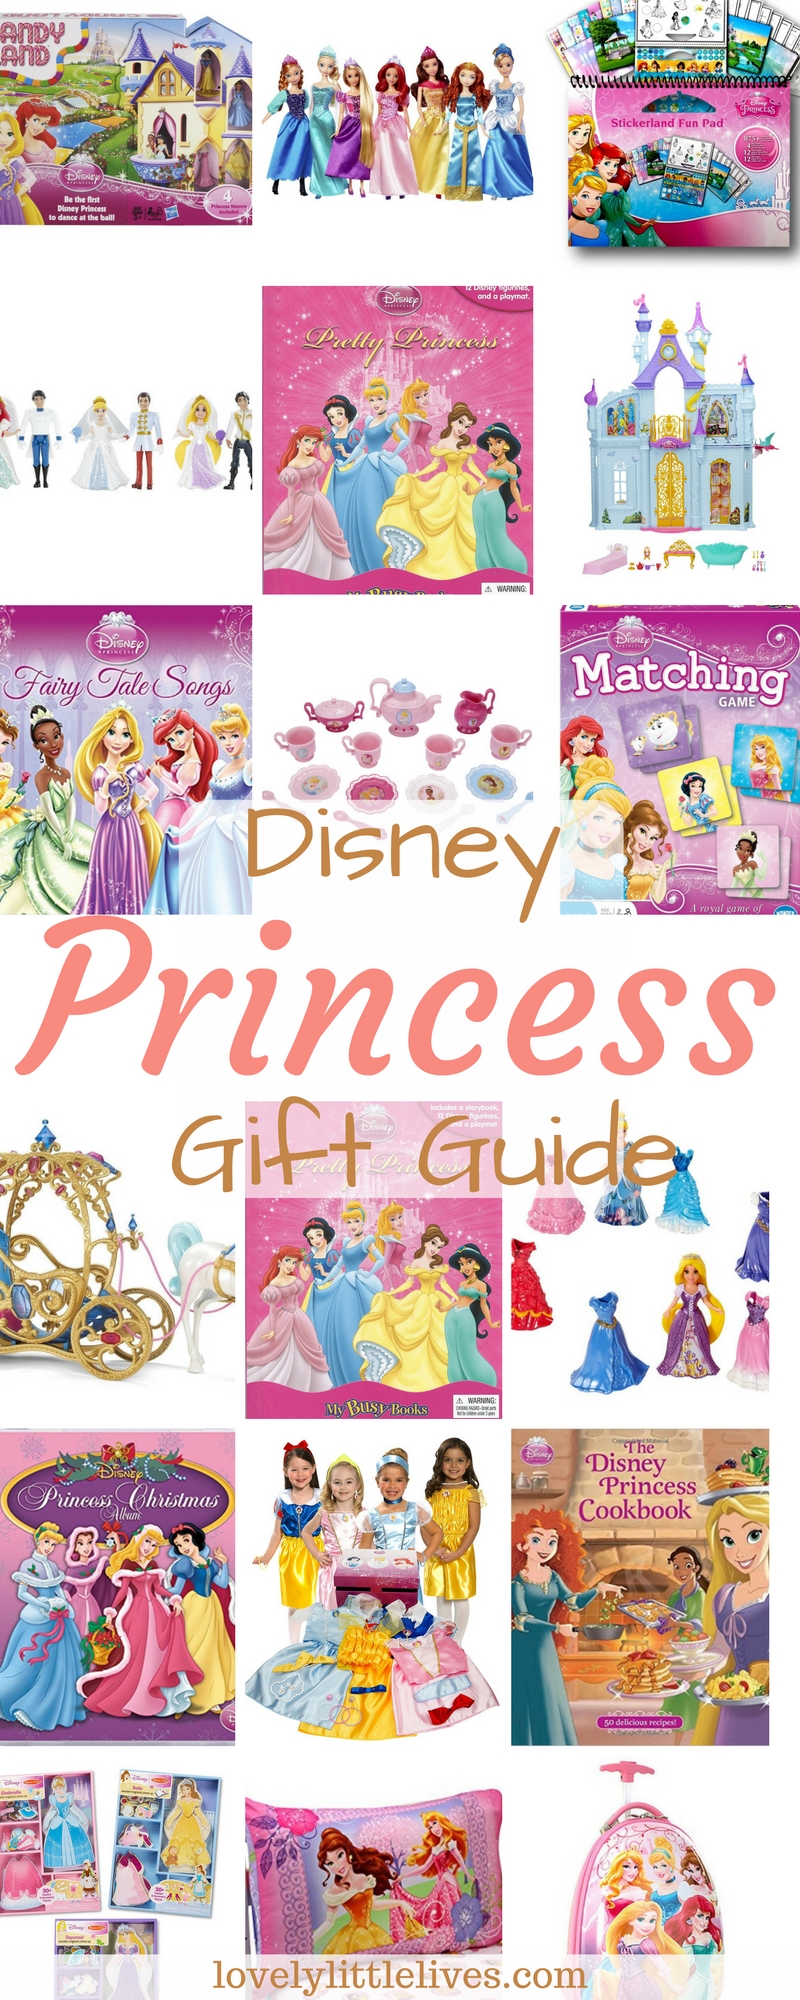 Disney Princess Gift Guide for Your Little Princess